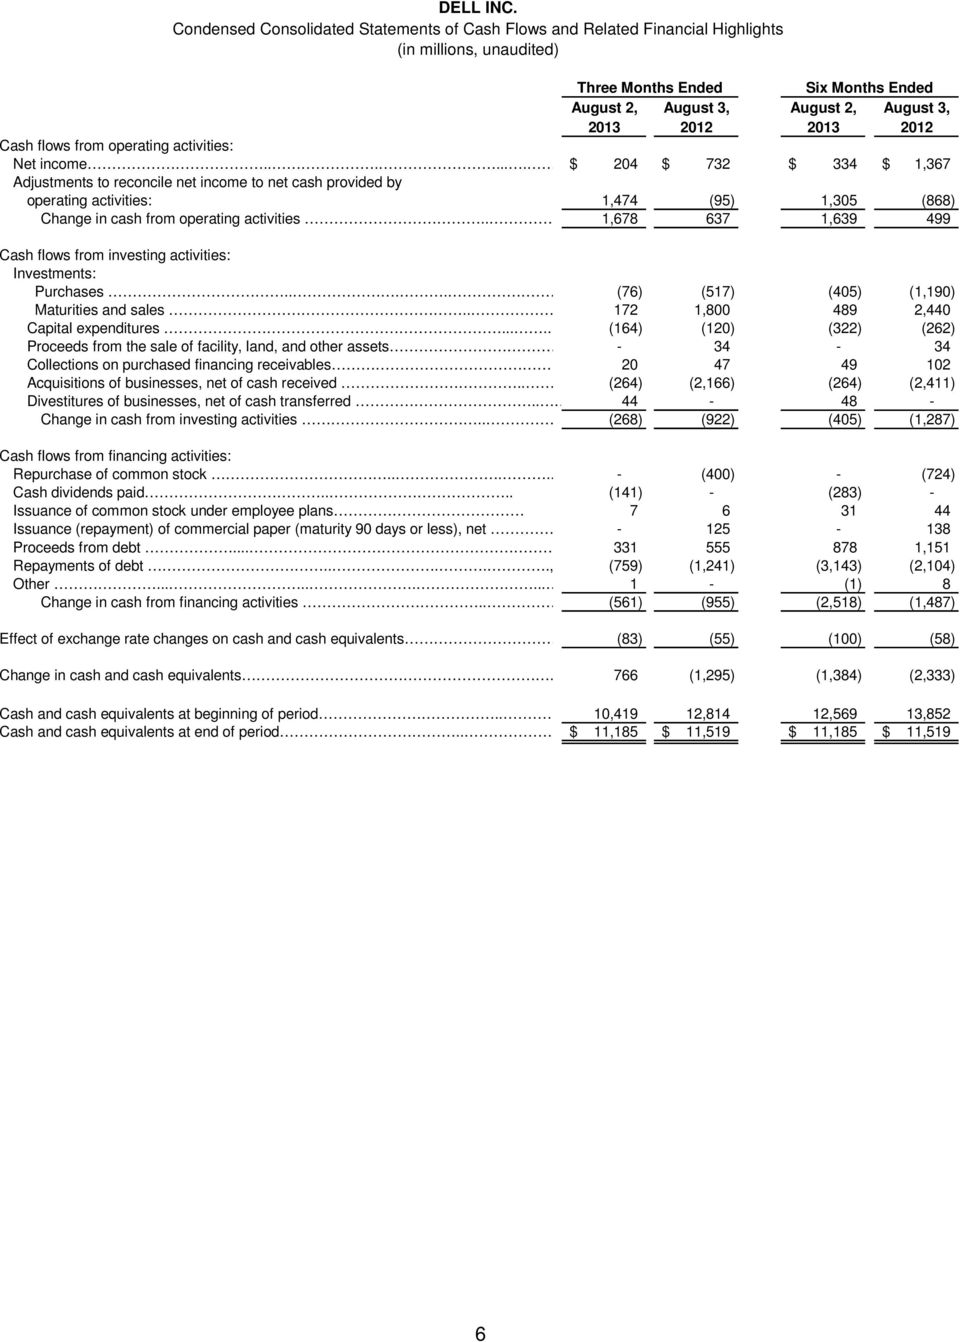 ...... $ 204 $ 732 $ 334 $ 1,367 Adjustments to reconcile net income to net cash provided by operating activities: 1,474 (95) 1,305 (868) Change in cash from operating activities.